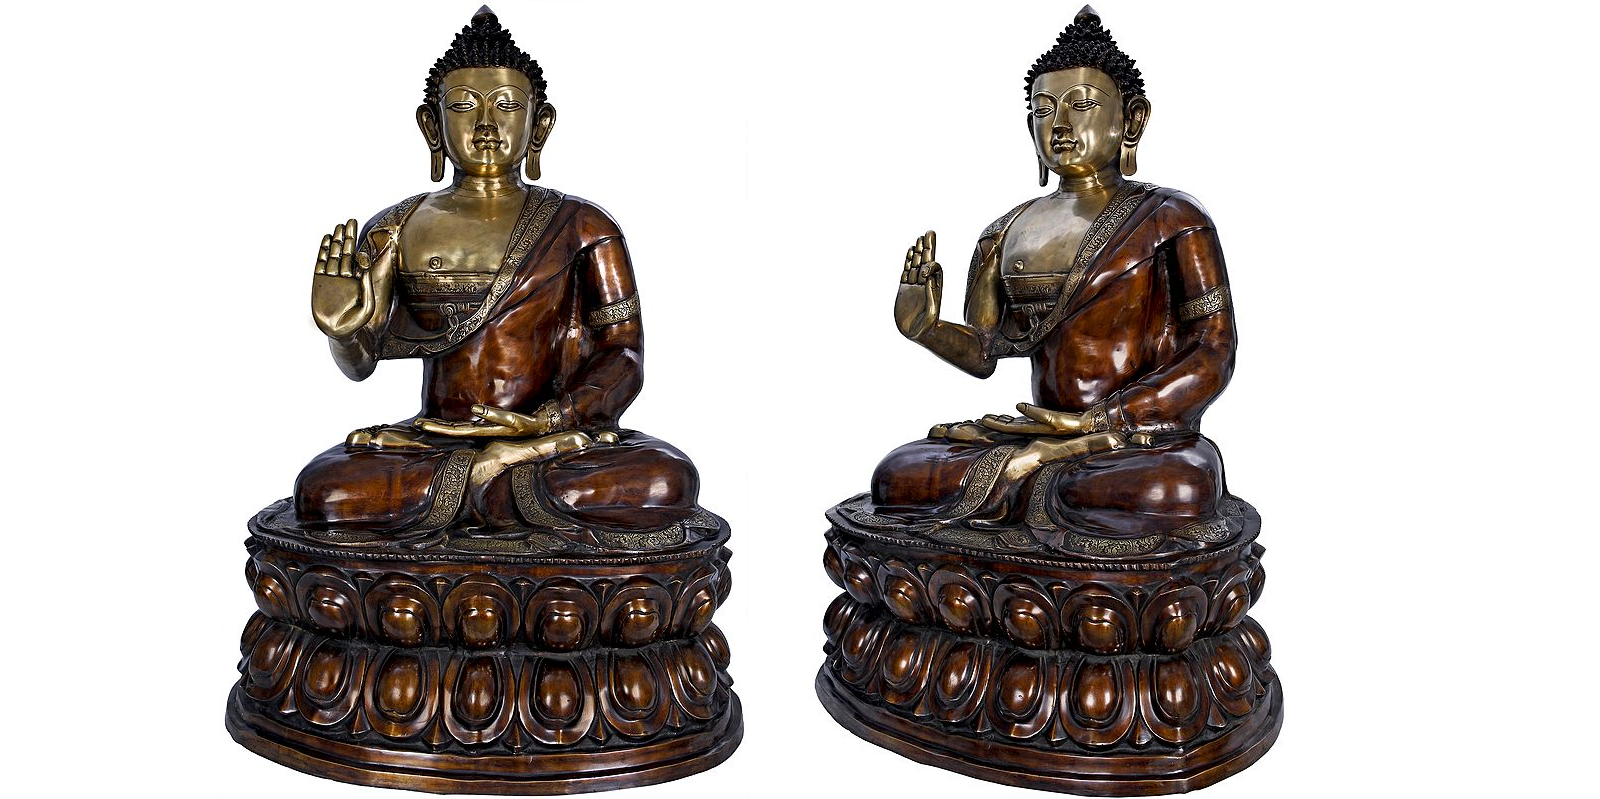 Incorporating Buddha Statues into Your Home